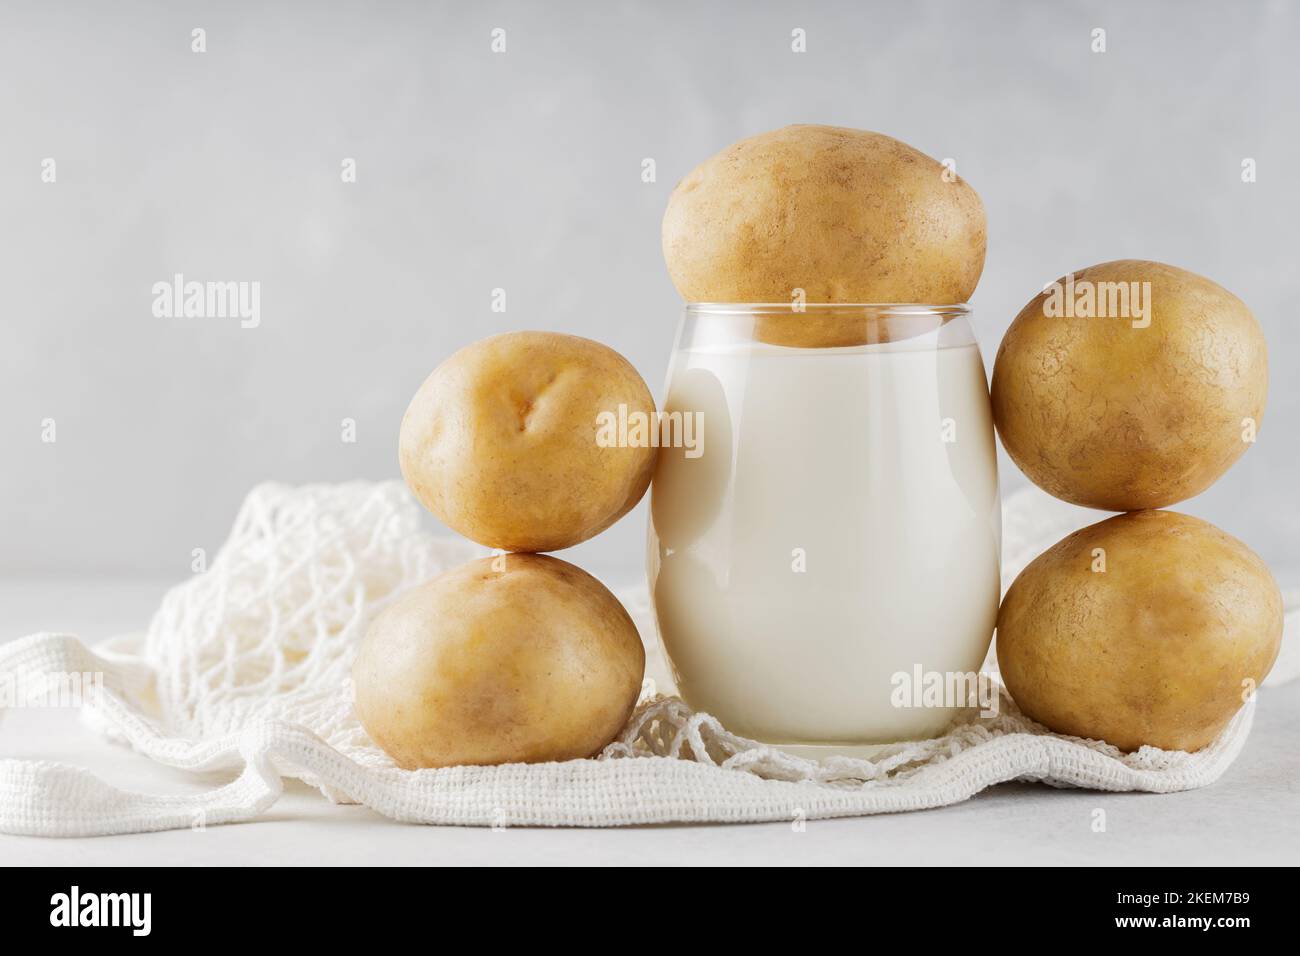 Alternative potato milk in glass and potatoes. Alternative non dairy drink and string bag. Vegan potato milk and sustainable lifestyle concept Stock Photo